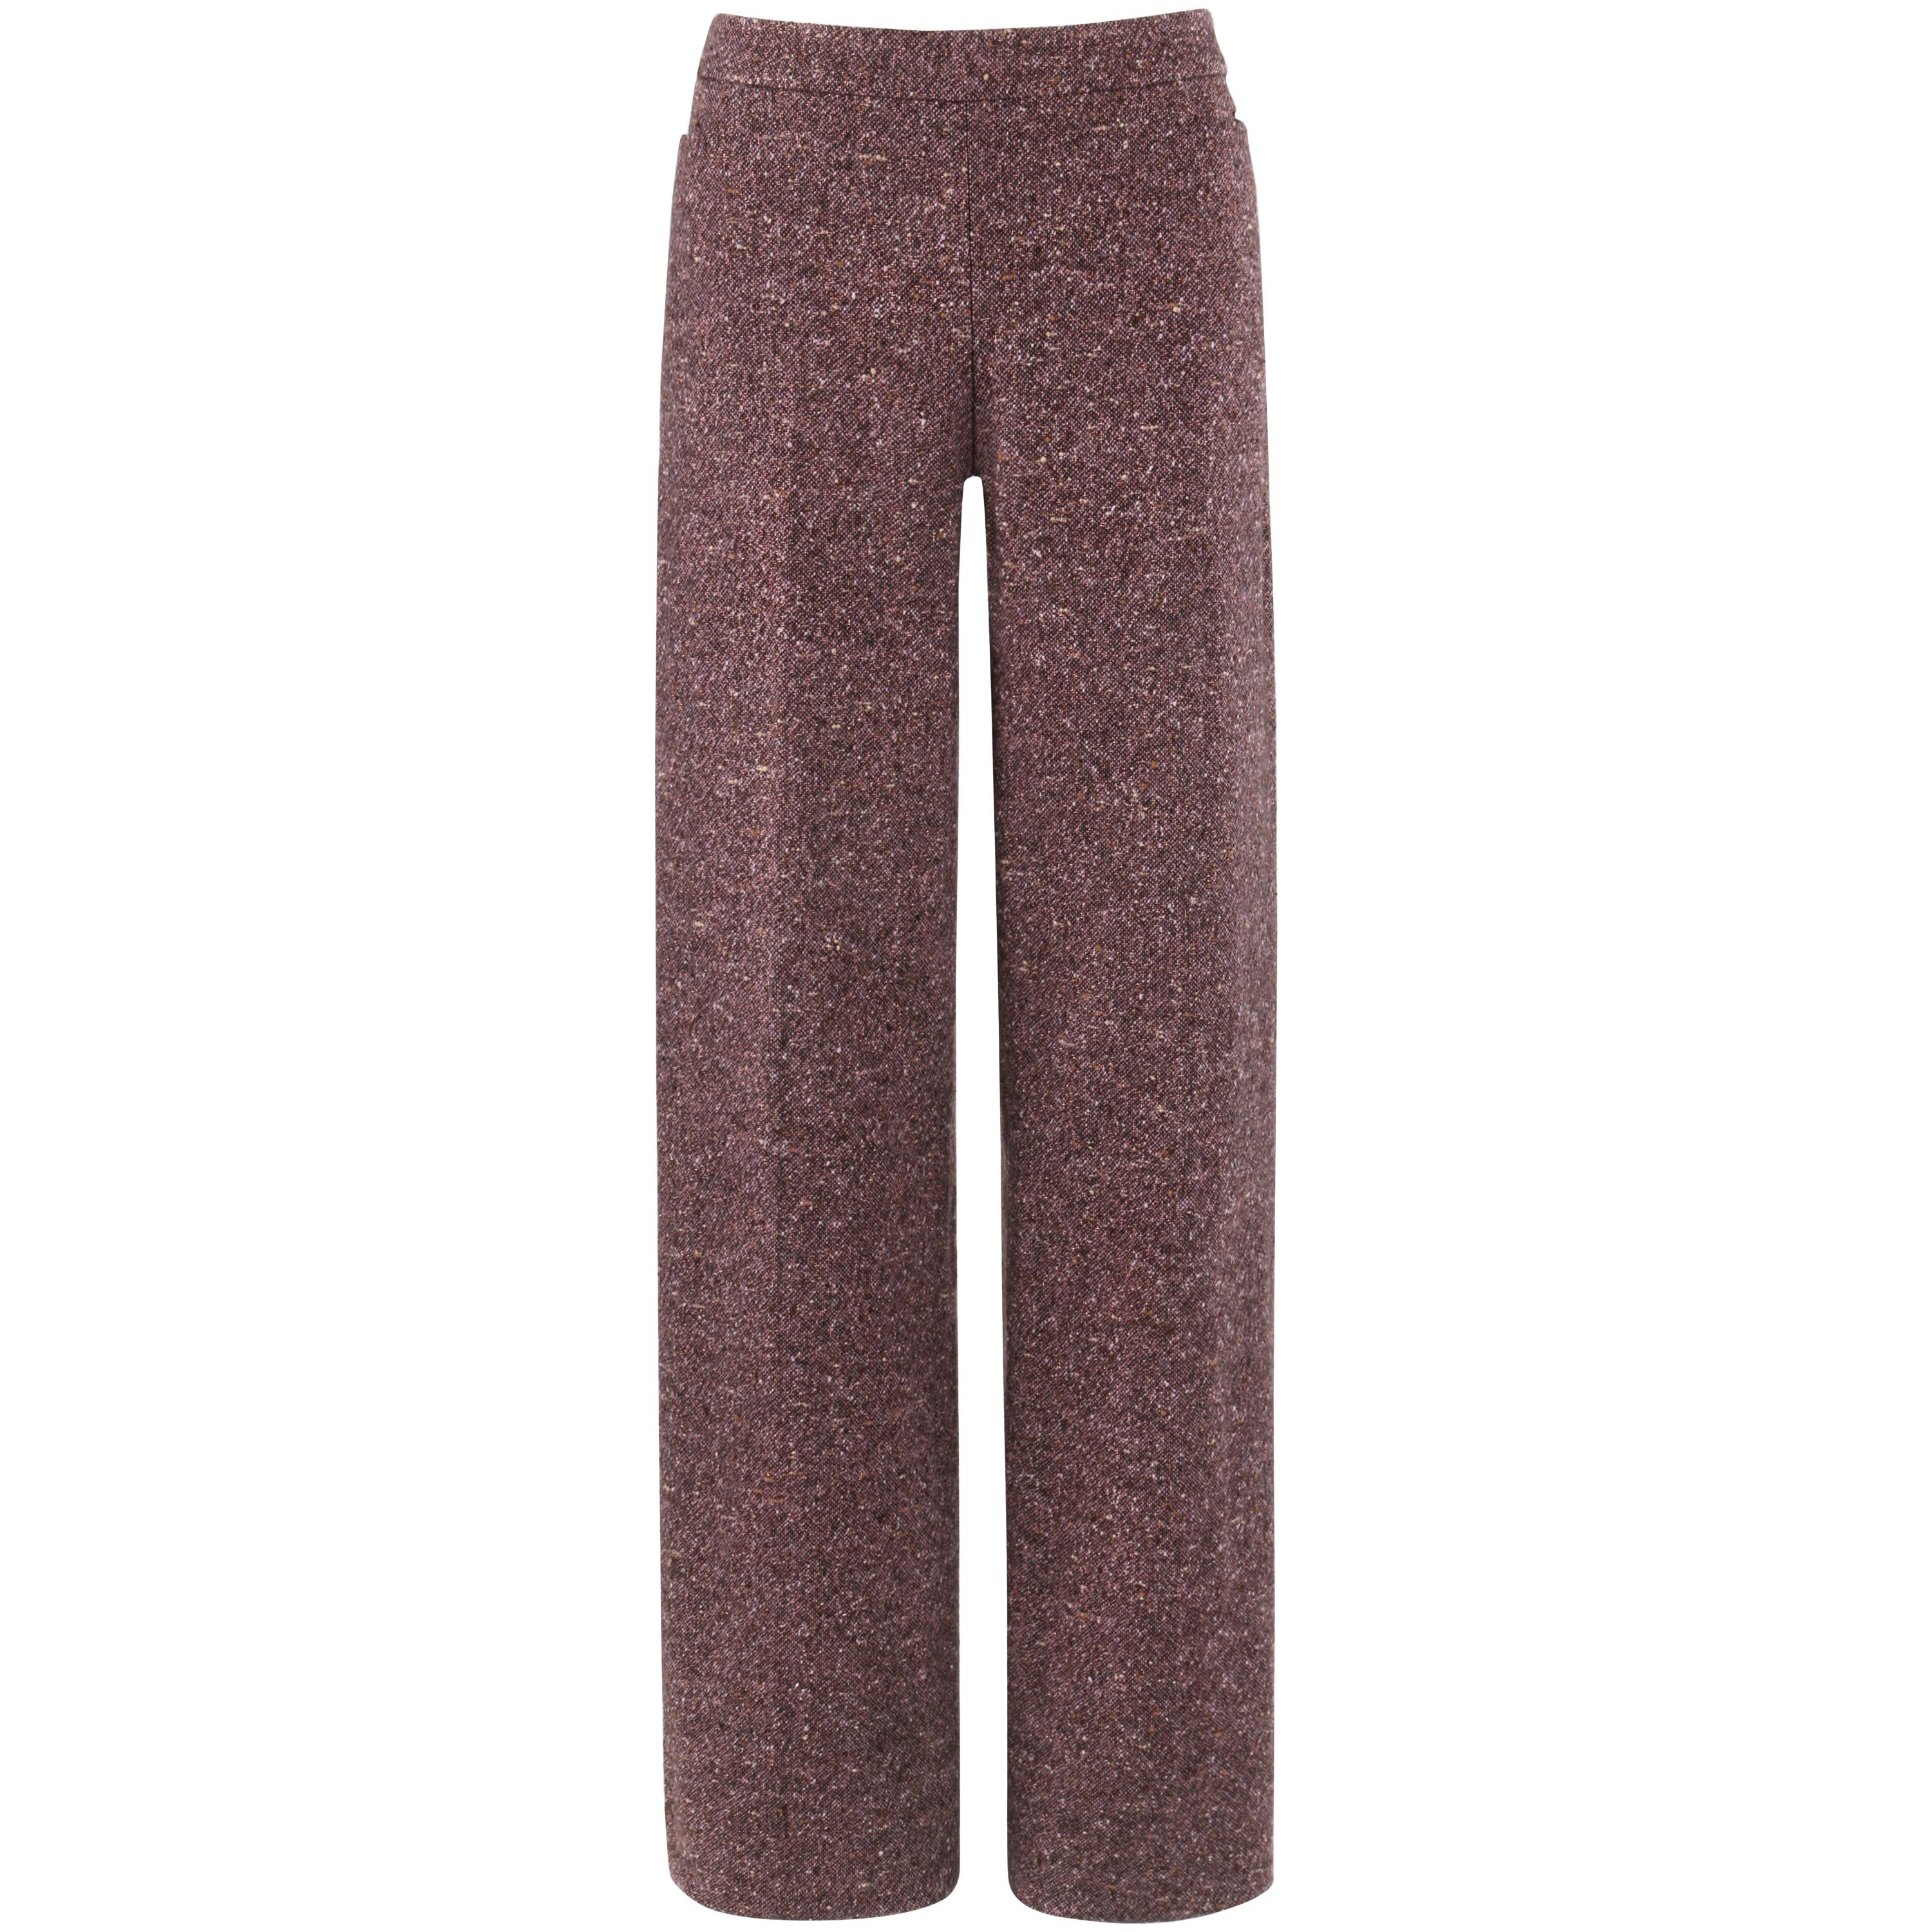 ALEXANDER McQUEEN A/W 2004 "Pantheon as Lecum" Metallic Tweed Trousers NWT For Sale